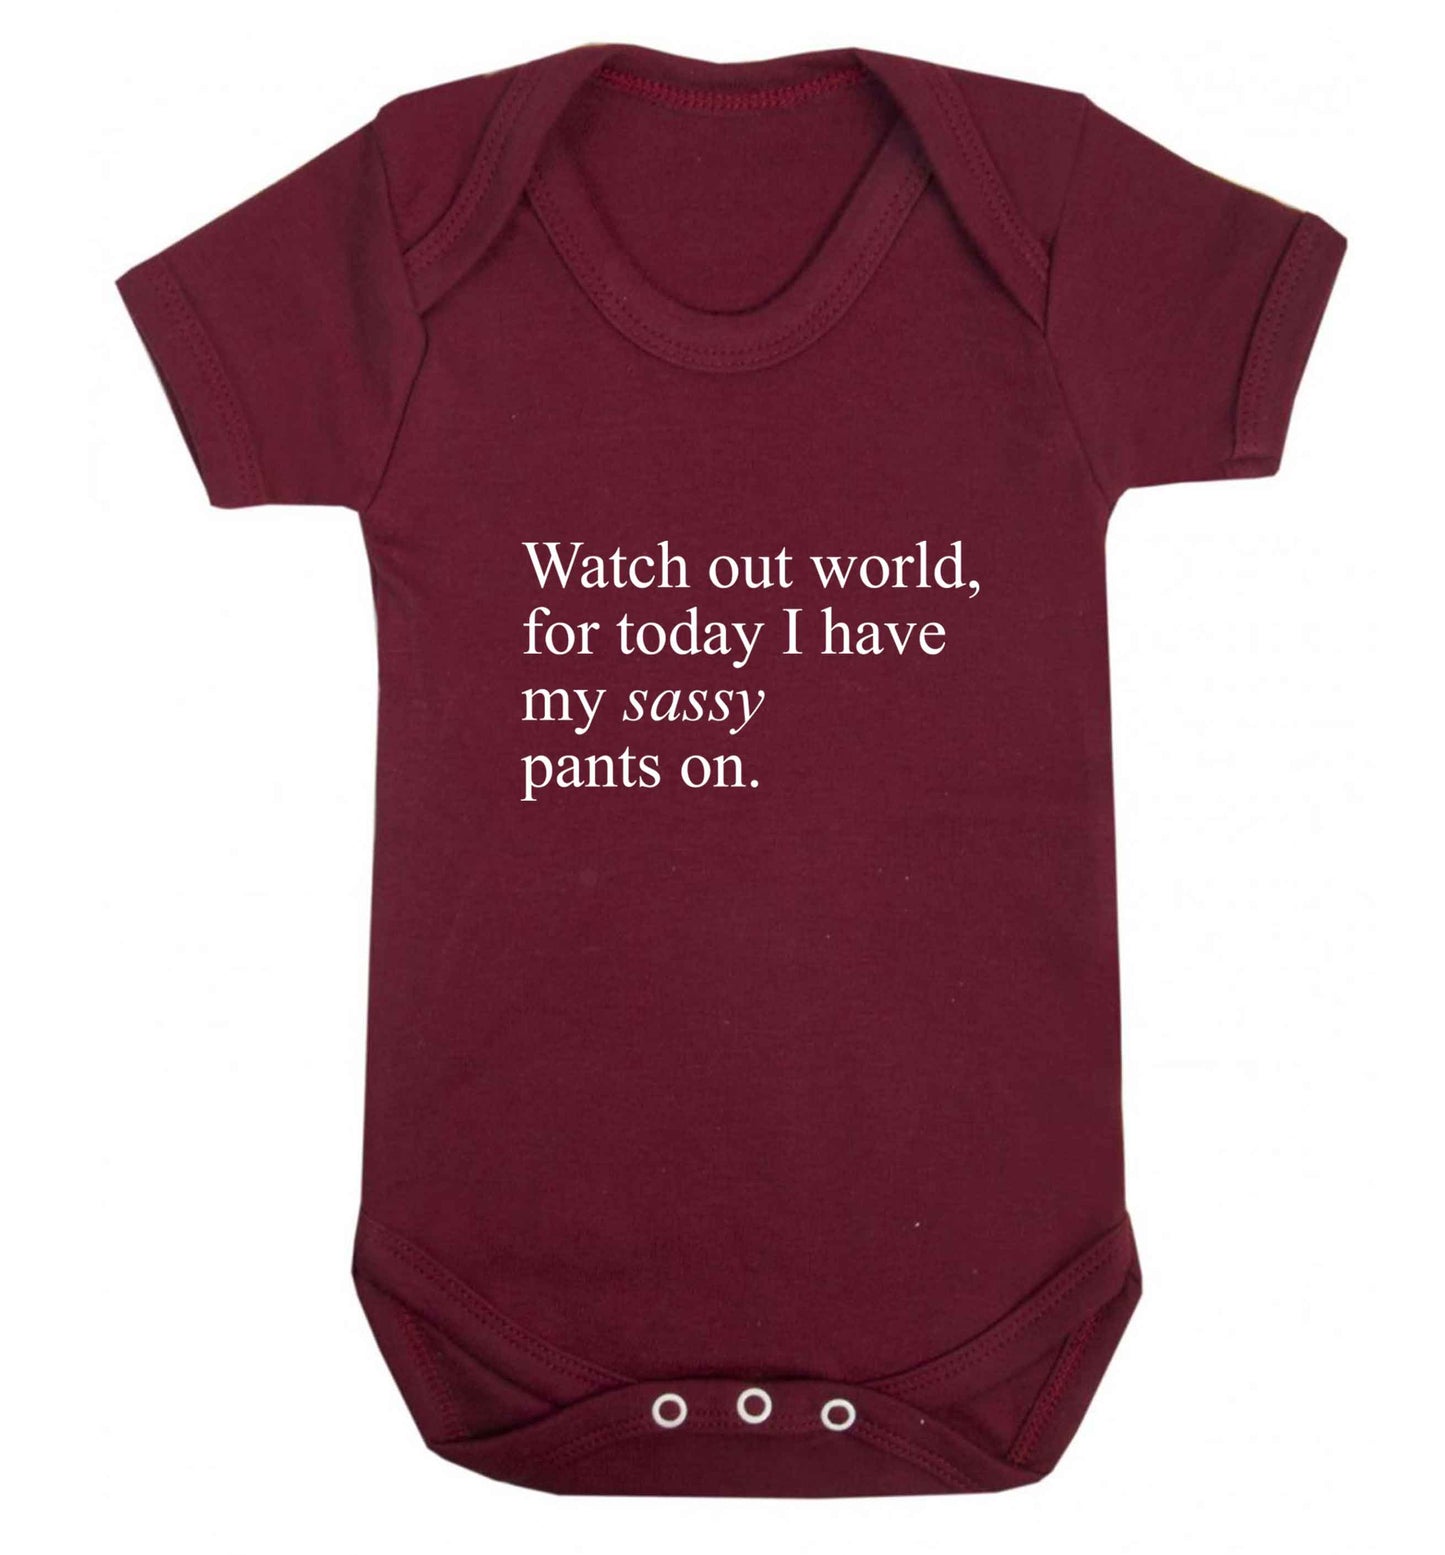 Watch out world for today I have my sassy pants on baby vest maroon 18-24 months